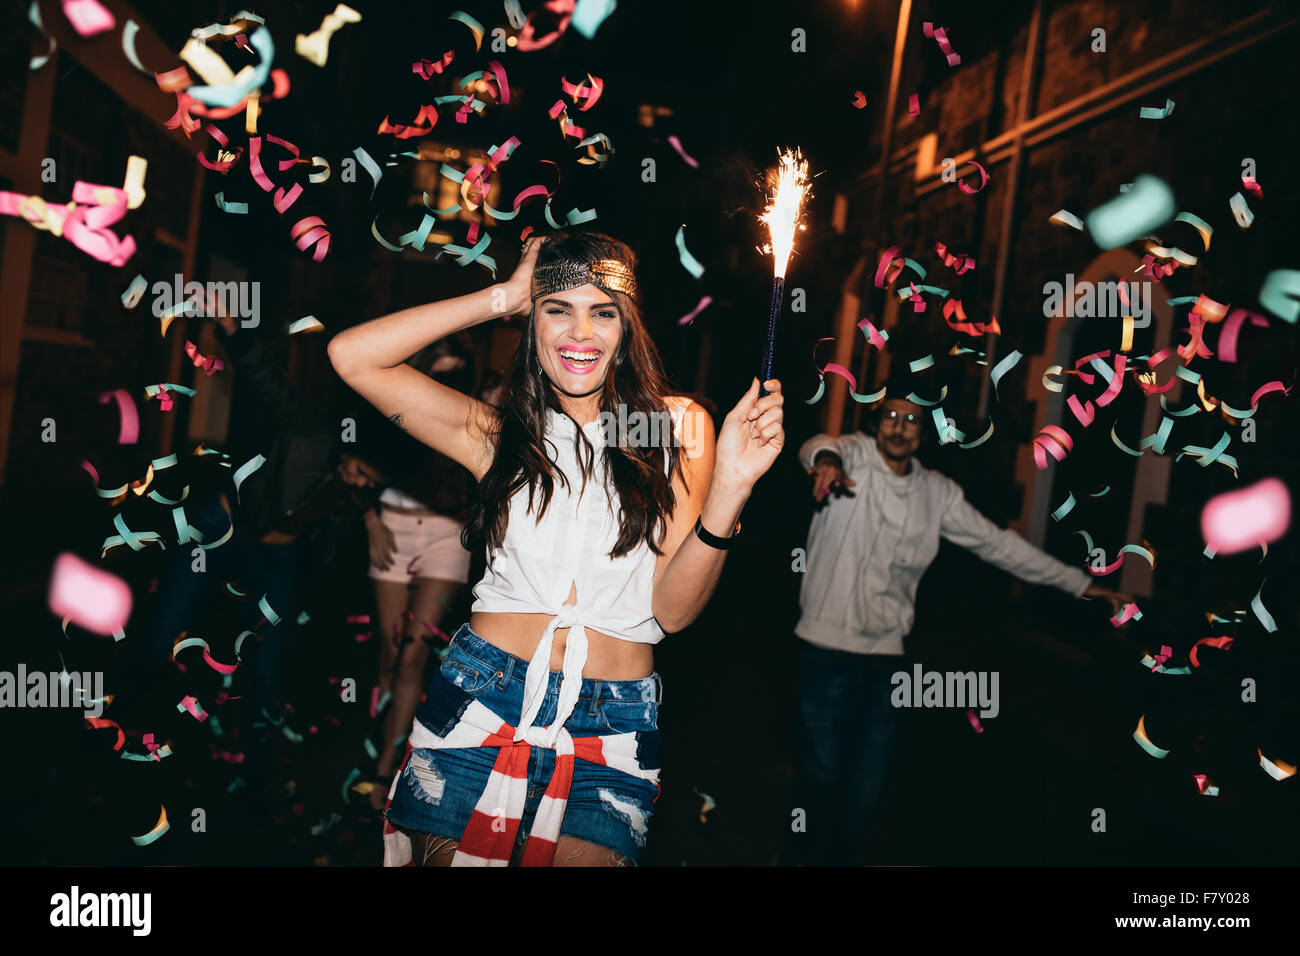 Happy young woman partying with her friends outdoors at night. Friends partying outdoors with confetti and sparklers. Stock Photo